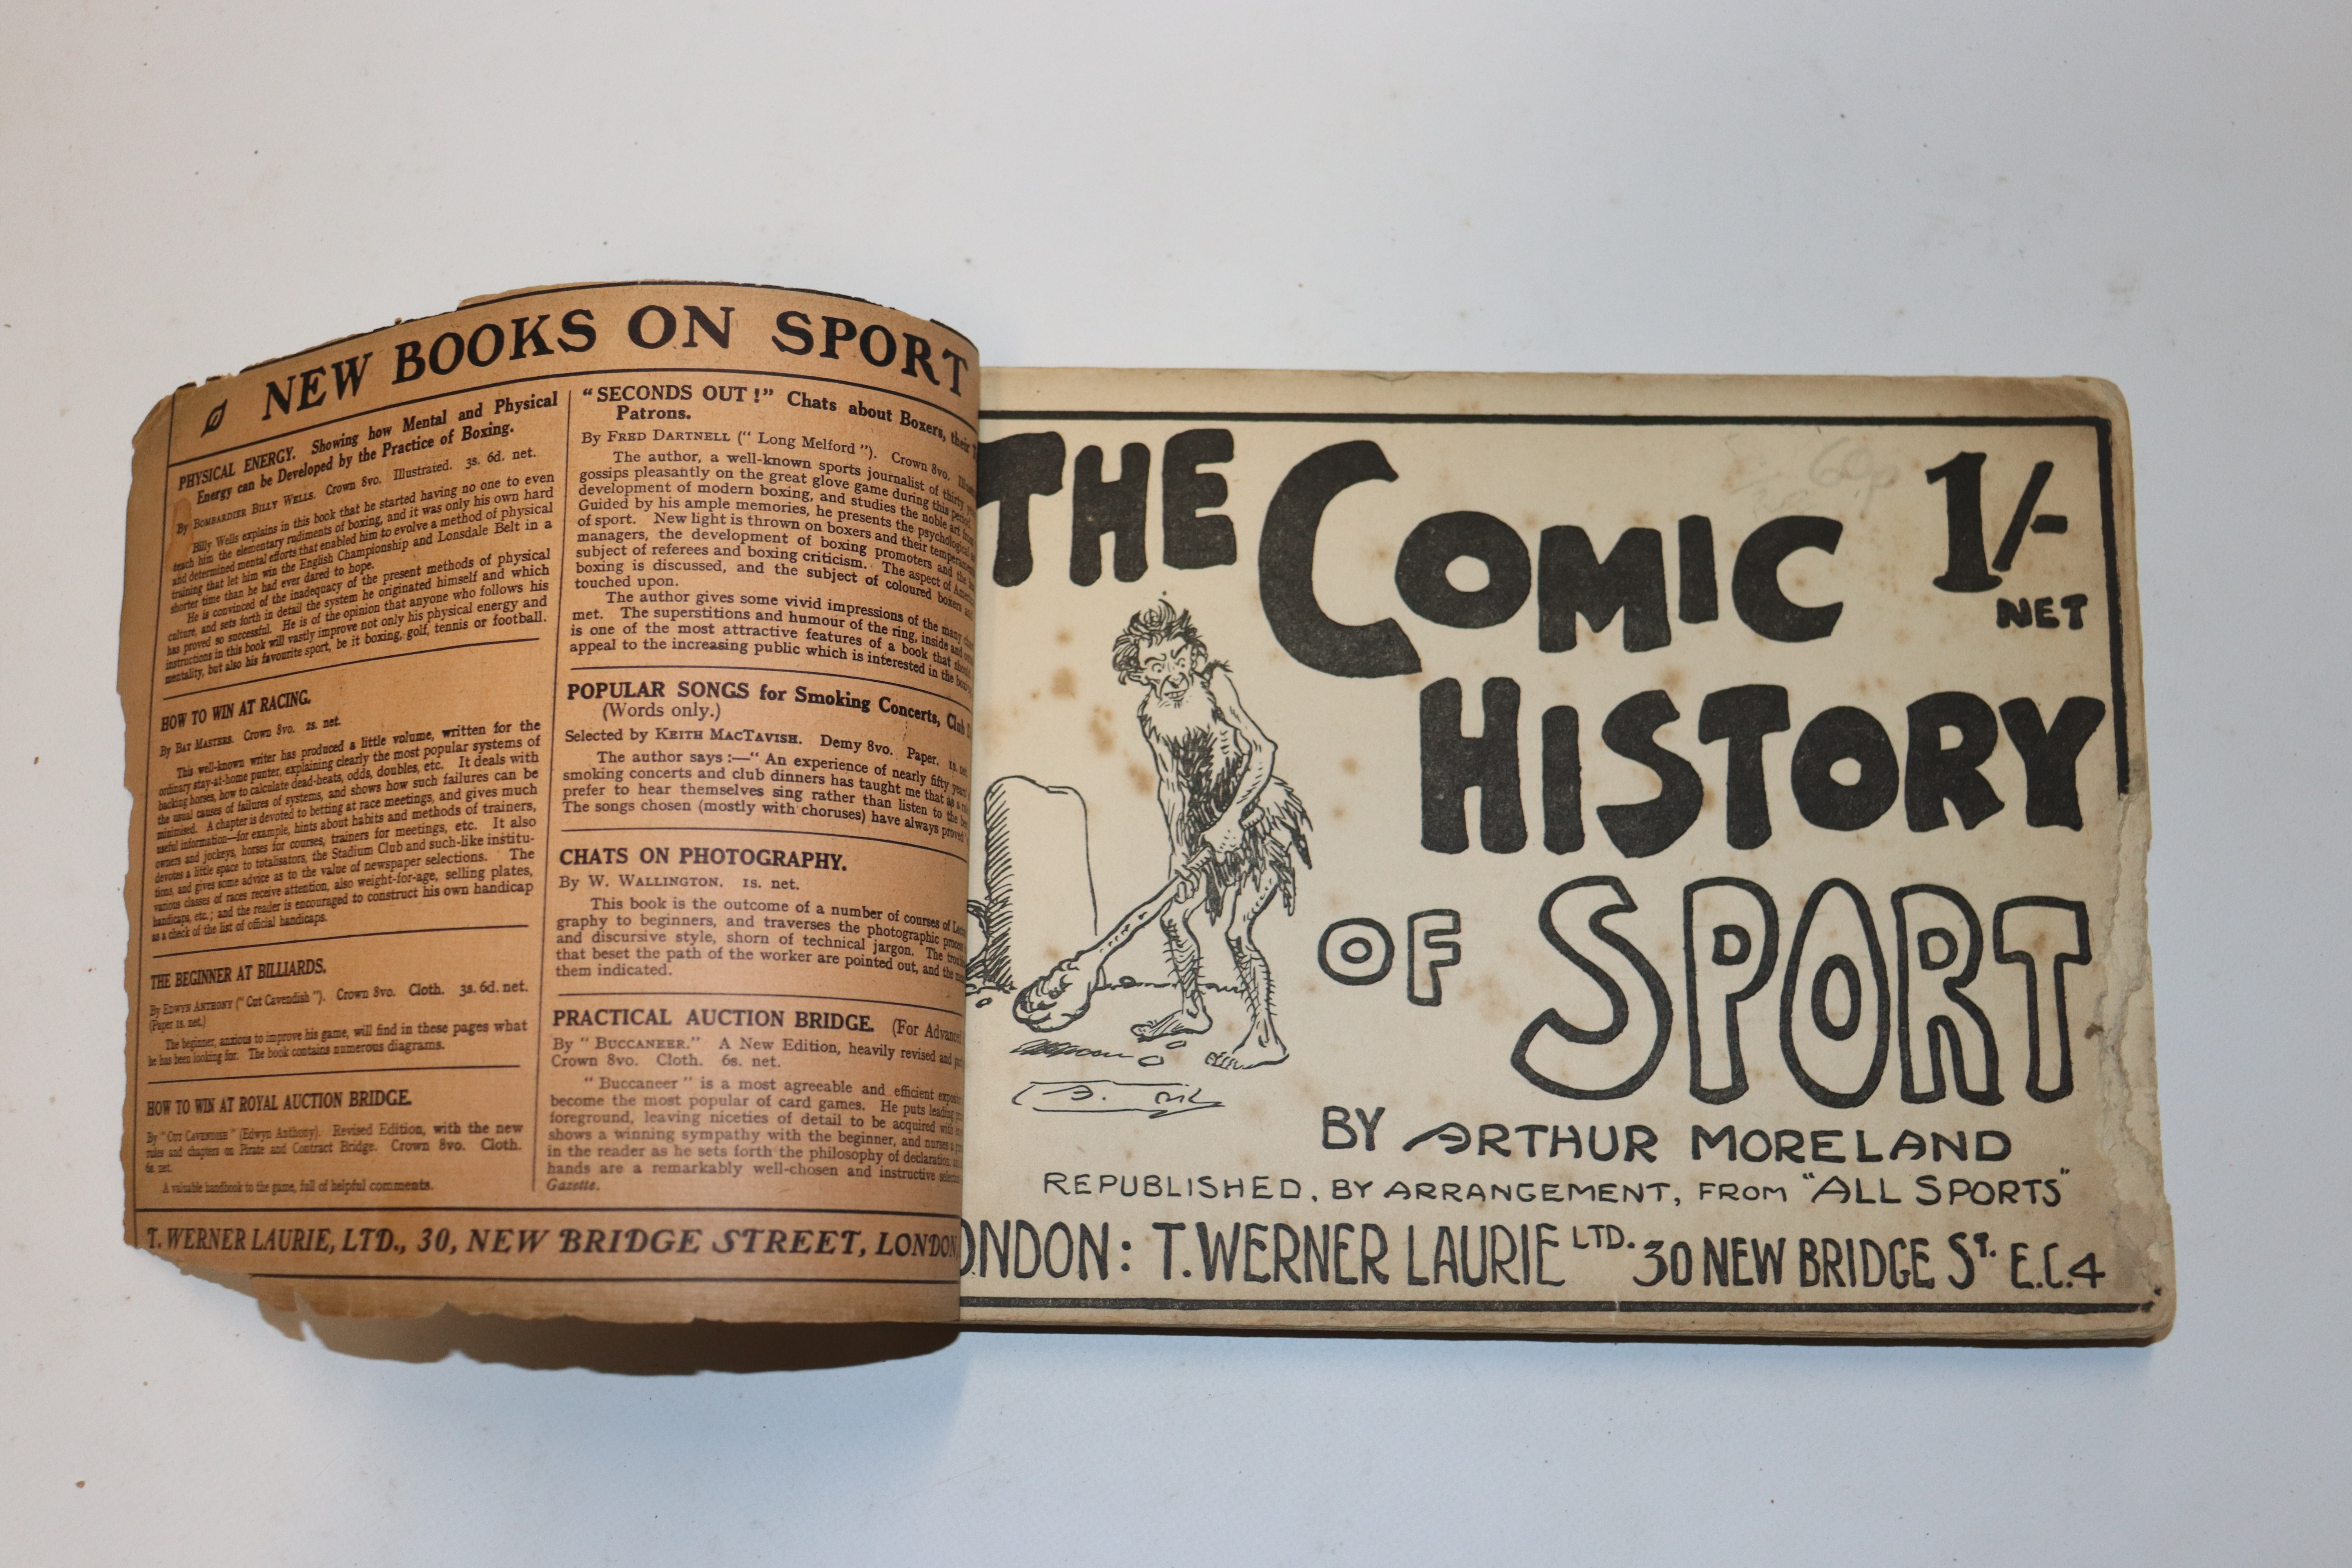 The Comic History of Sport by Arthur Moreland - Image 2 of 3